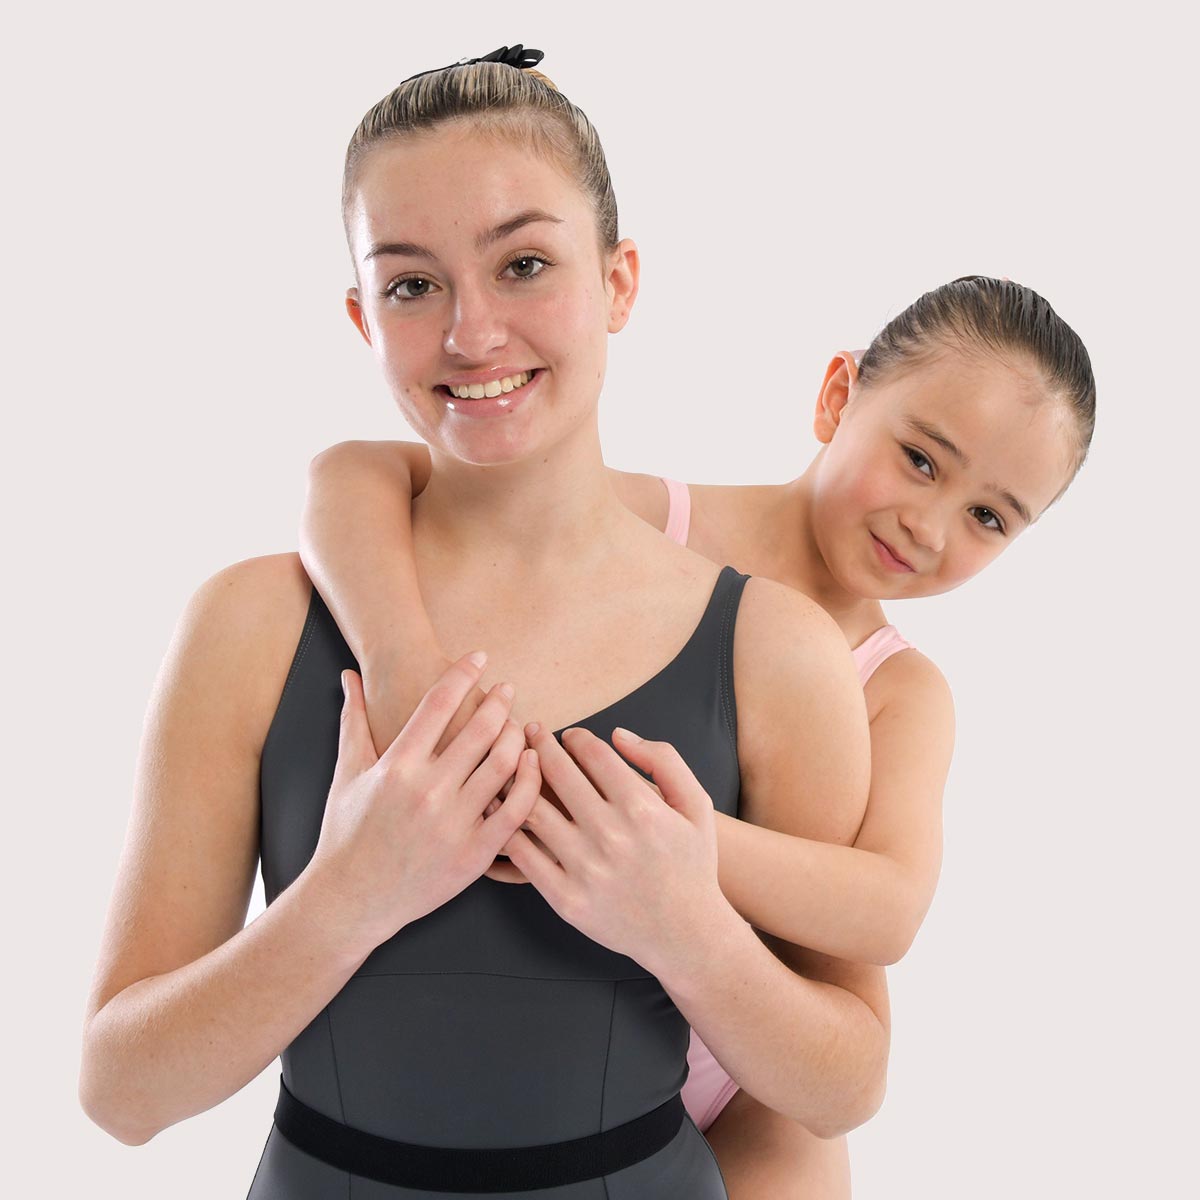 Dance Classes for Kids & Adults in Cleveland - Redland Dance School